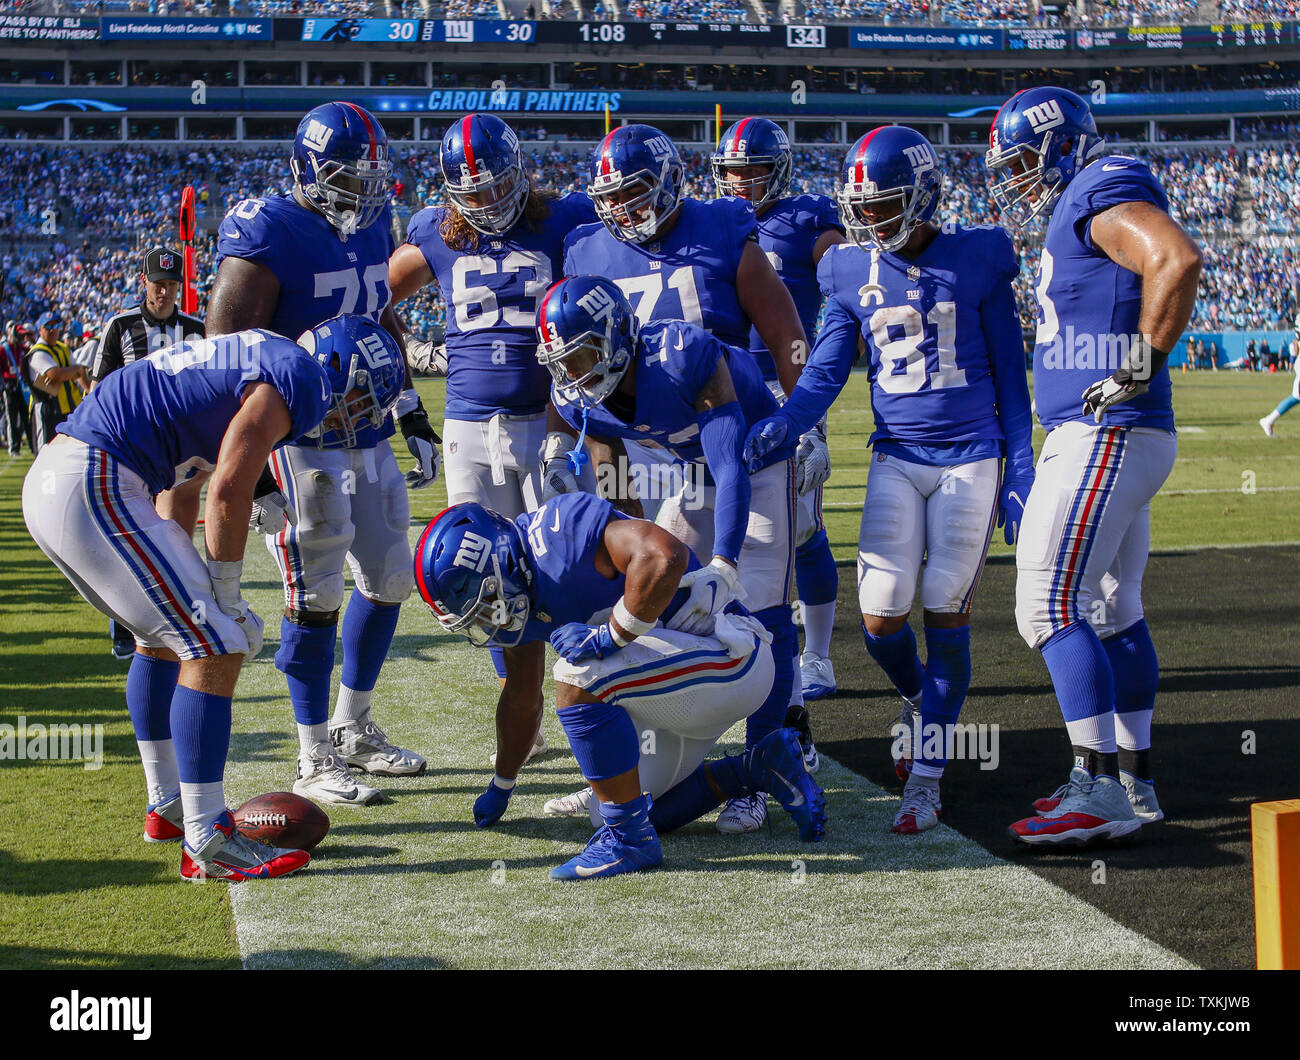 New York Giants players surround running back Saquon Barkley (kneeling)  after he scores a touchdown against the Carolina Panthers in the second  half of an NFL football game in Charlotte, North Carolina